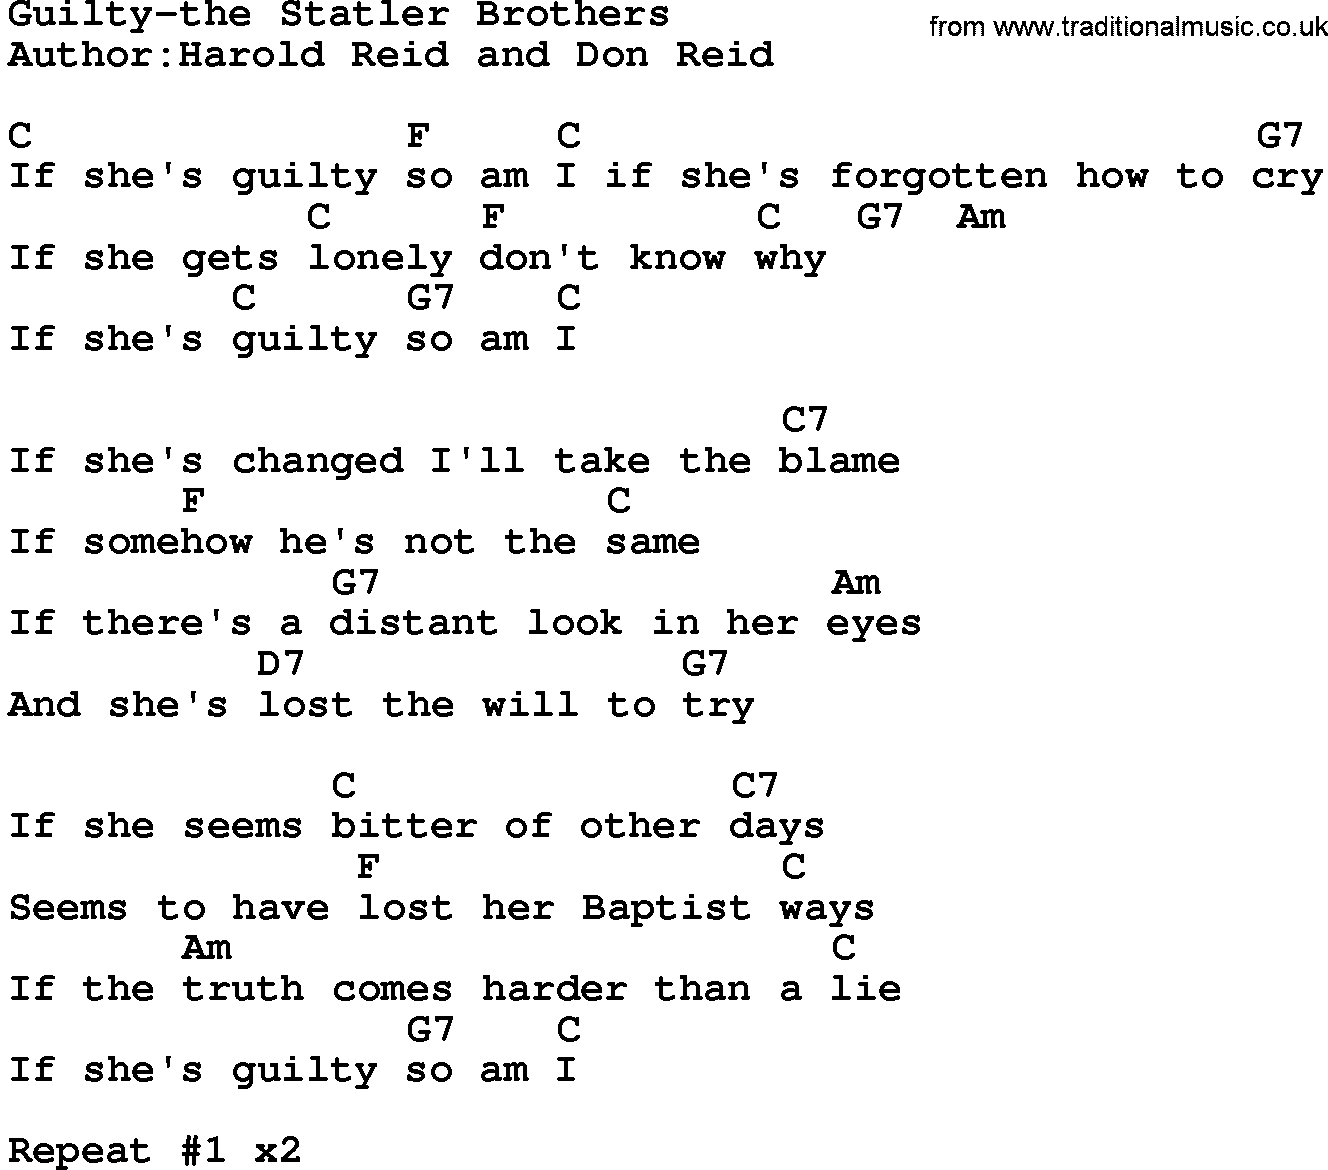 Country music song: Guilty-The Statler Brothers lyrics and chords